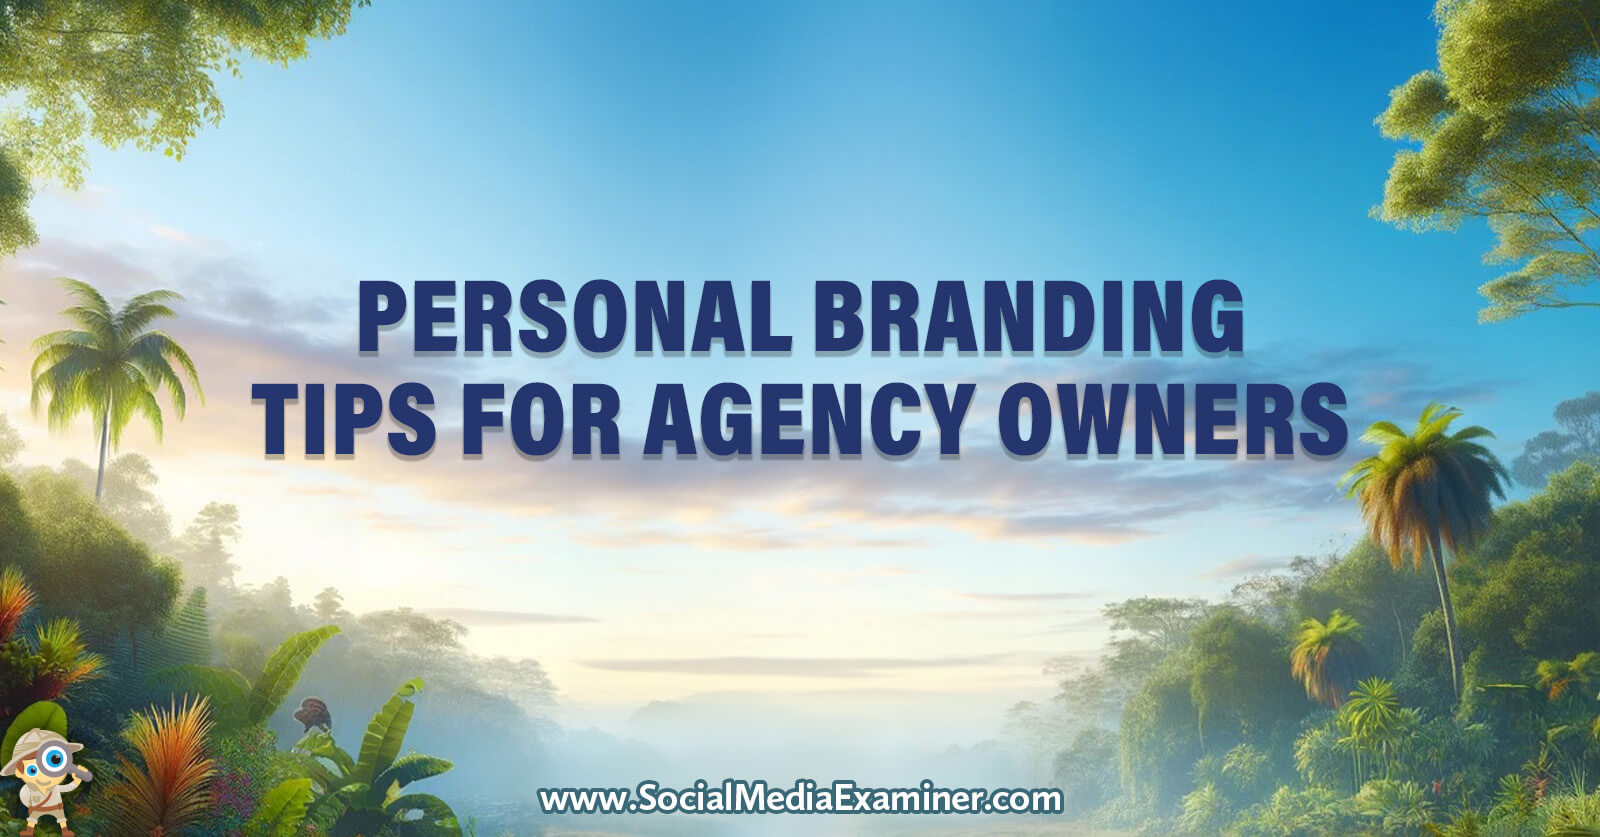 Personal Branding Tips for Agency Owners by Social Media Examiner